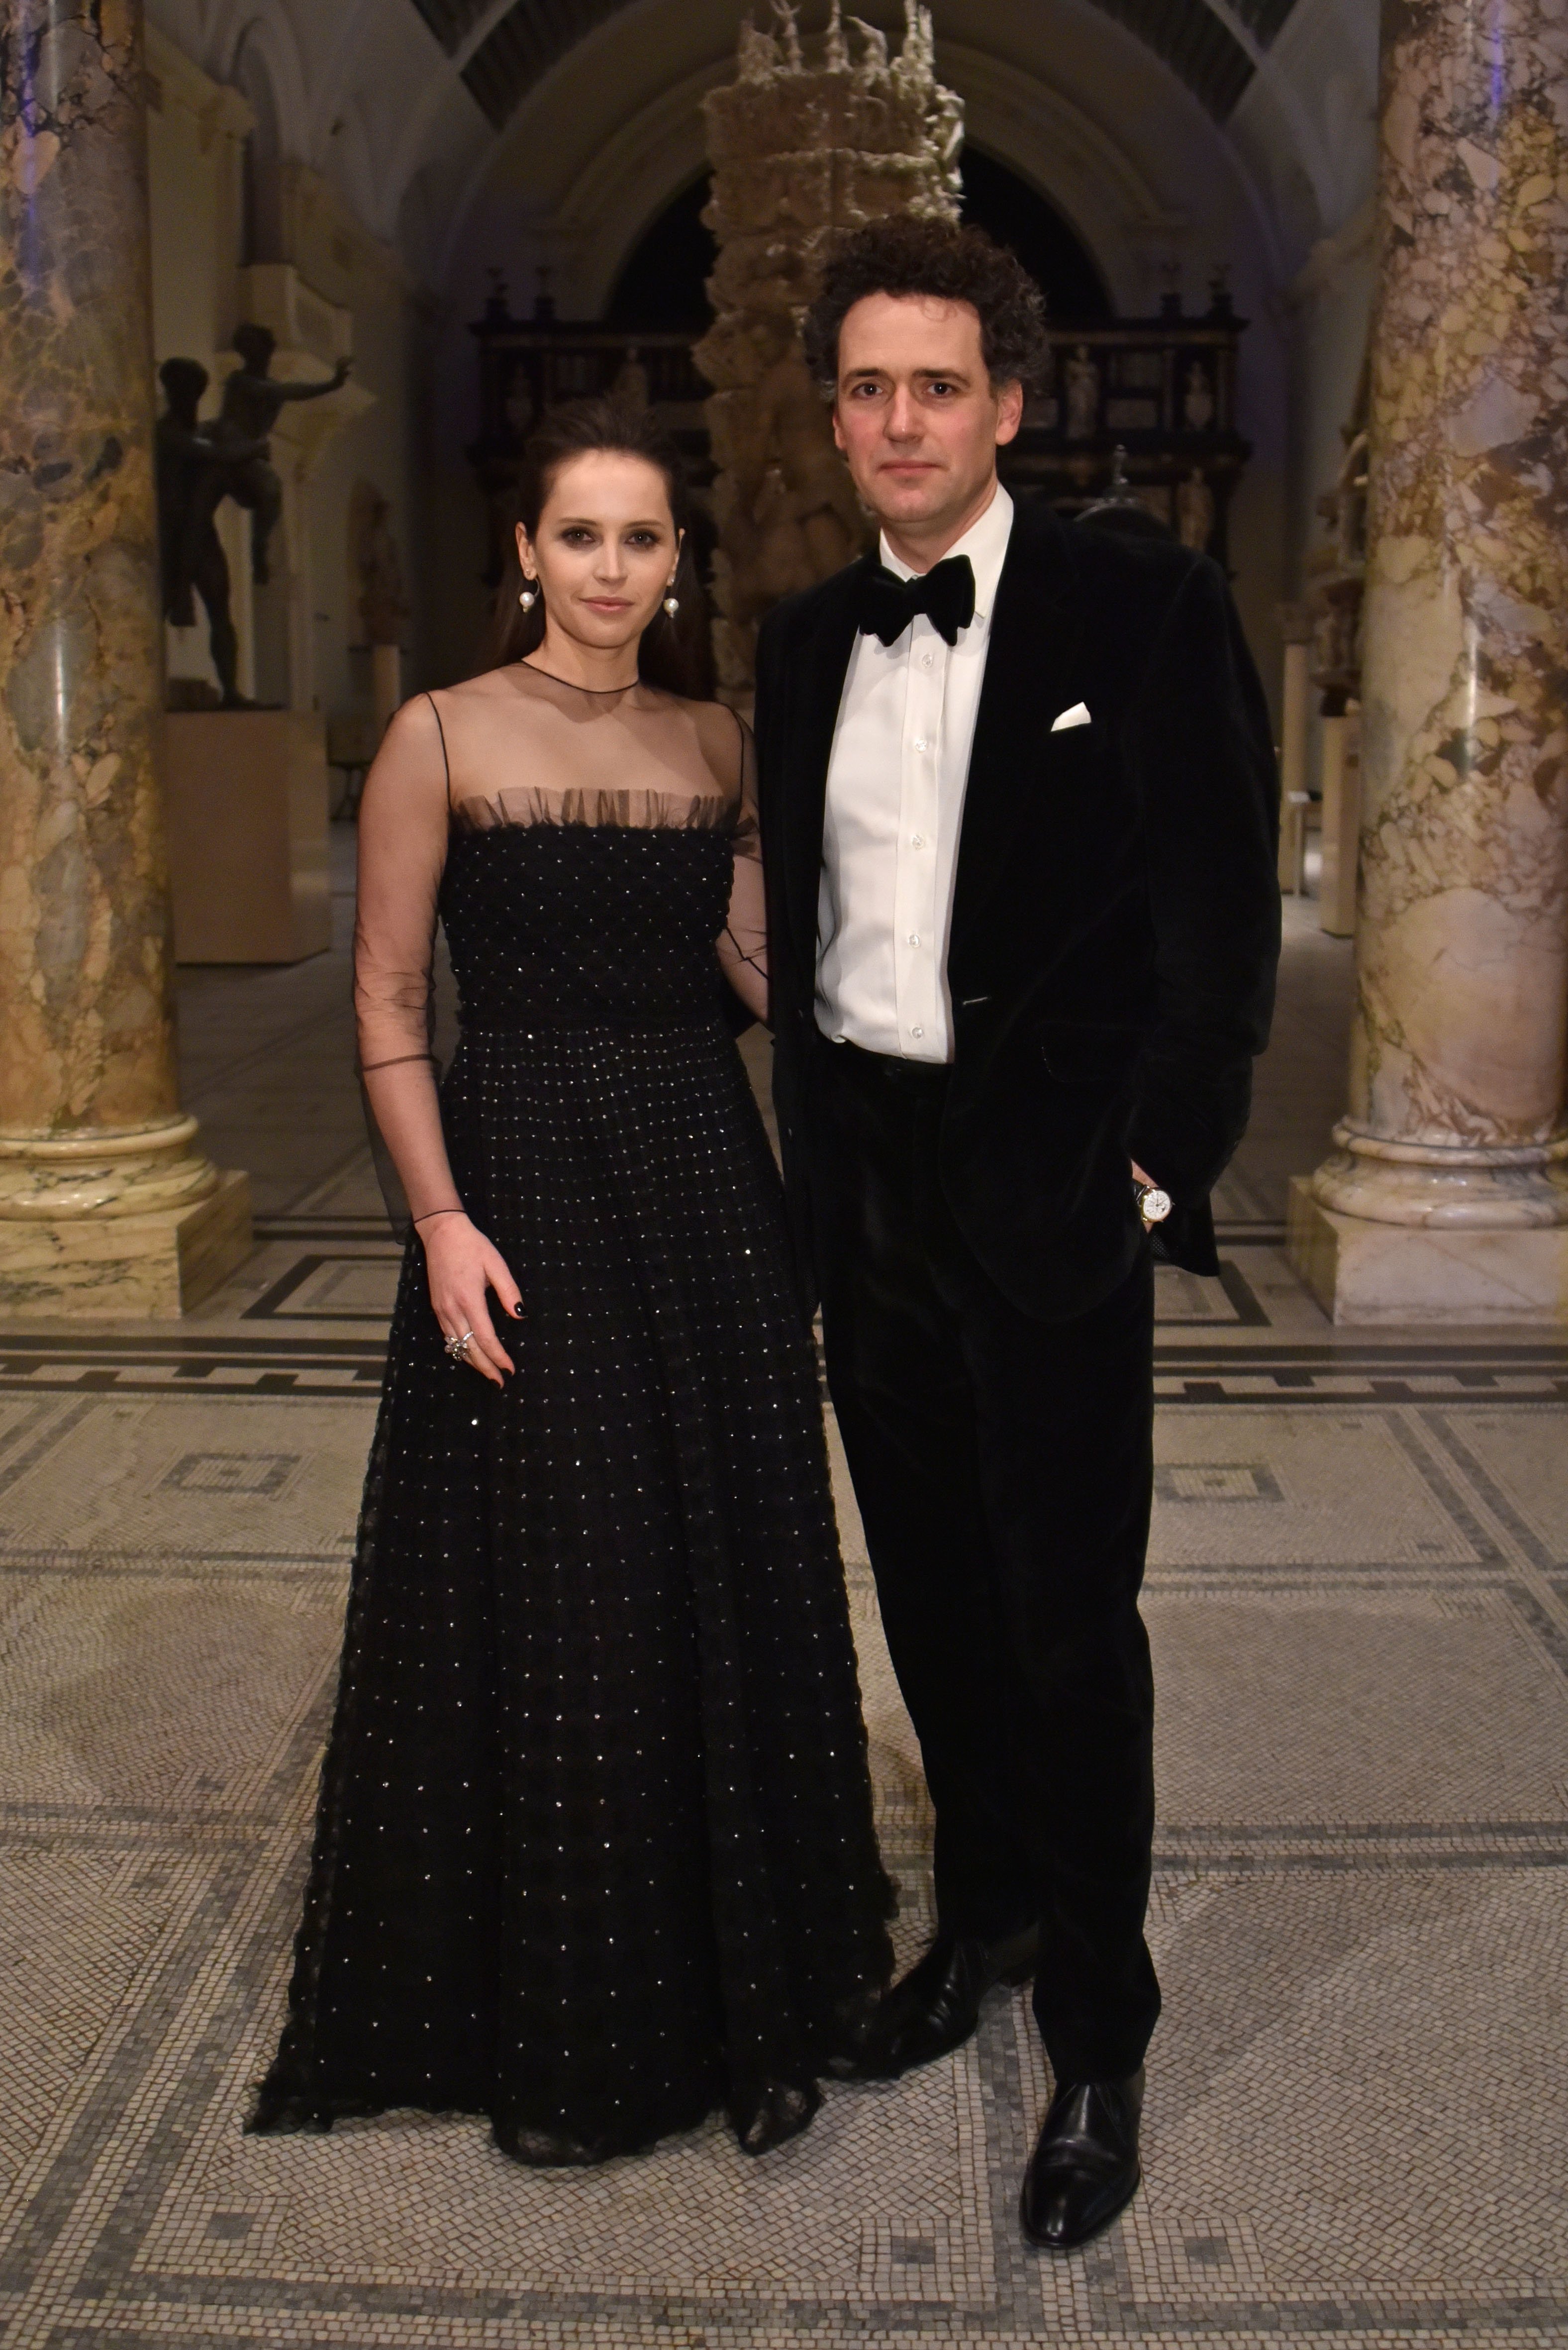 Felicity Jones and Charles Guard at the opening of the "Christian Dior: Designer of Dreams" exhibition on January 29, 2019, in London, England. | Source: Getty Images